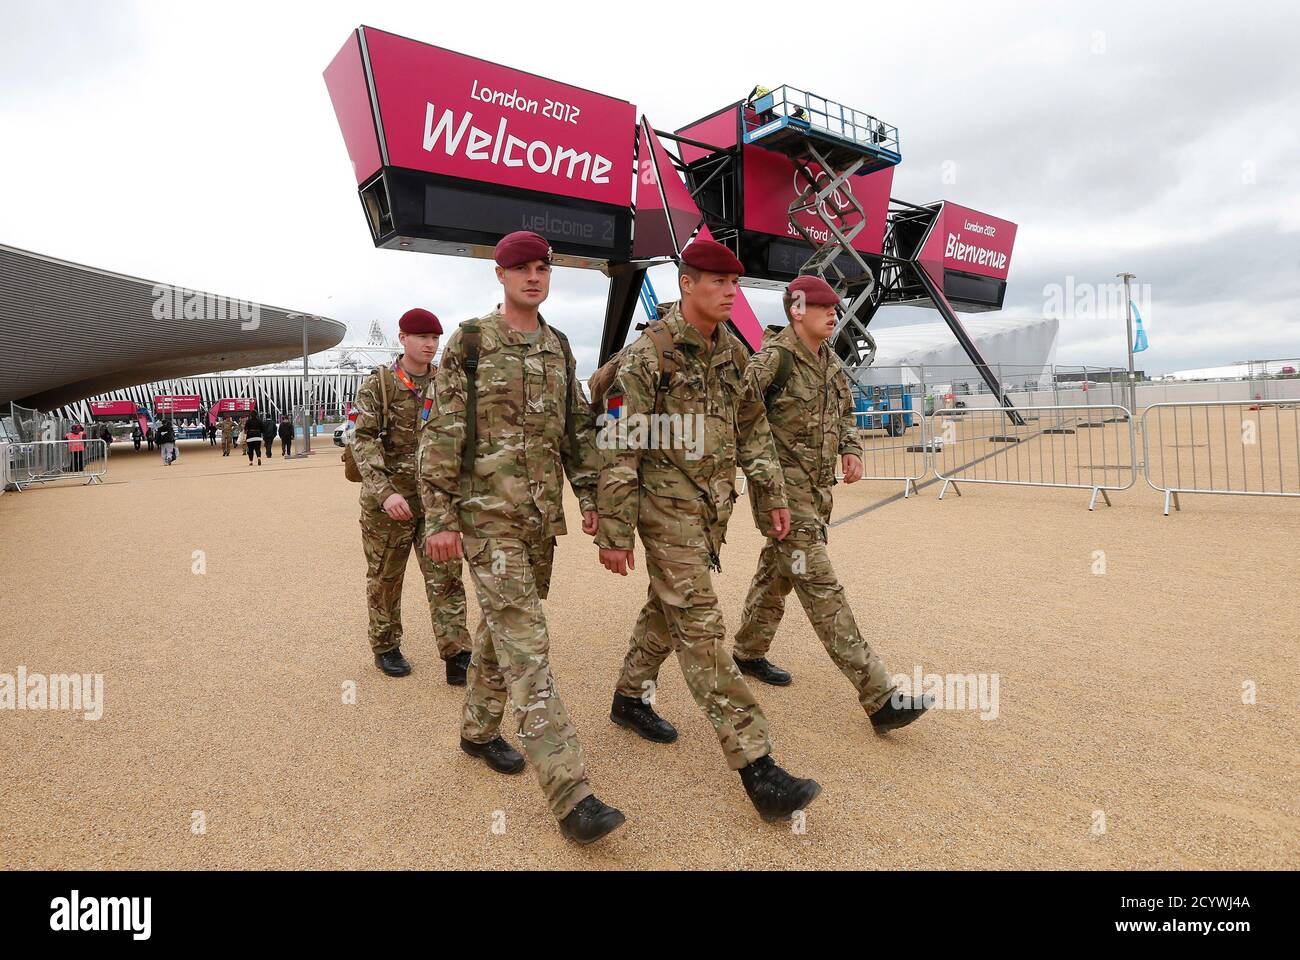 2022 Commonwealth Games | Birmingham, England | 28 July - 8 August - Page 2 Soldiers-walk-past-a-welcome-sign-at-the-olympic-park-in-stratford-the-location-of-the-london-2012-olympic-games-in-east-london-july-18-2012-britain-may-have-to-call-up-yet-more-soldiers-to-police-the-olympic-games-the-government-said-on-wednesday-after-a-failed-private-sector-recruitment-drive-left-an-embarrassing-hole-in-security-and-dashed-londons-dreams-of-a-spotless-showcase-reuterssuzanne-plunkett-britain-tags-sport-olympics-military-tpx-images-of-the-day-2CYWJ4A